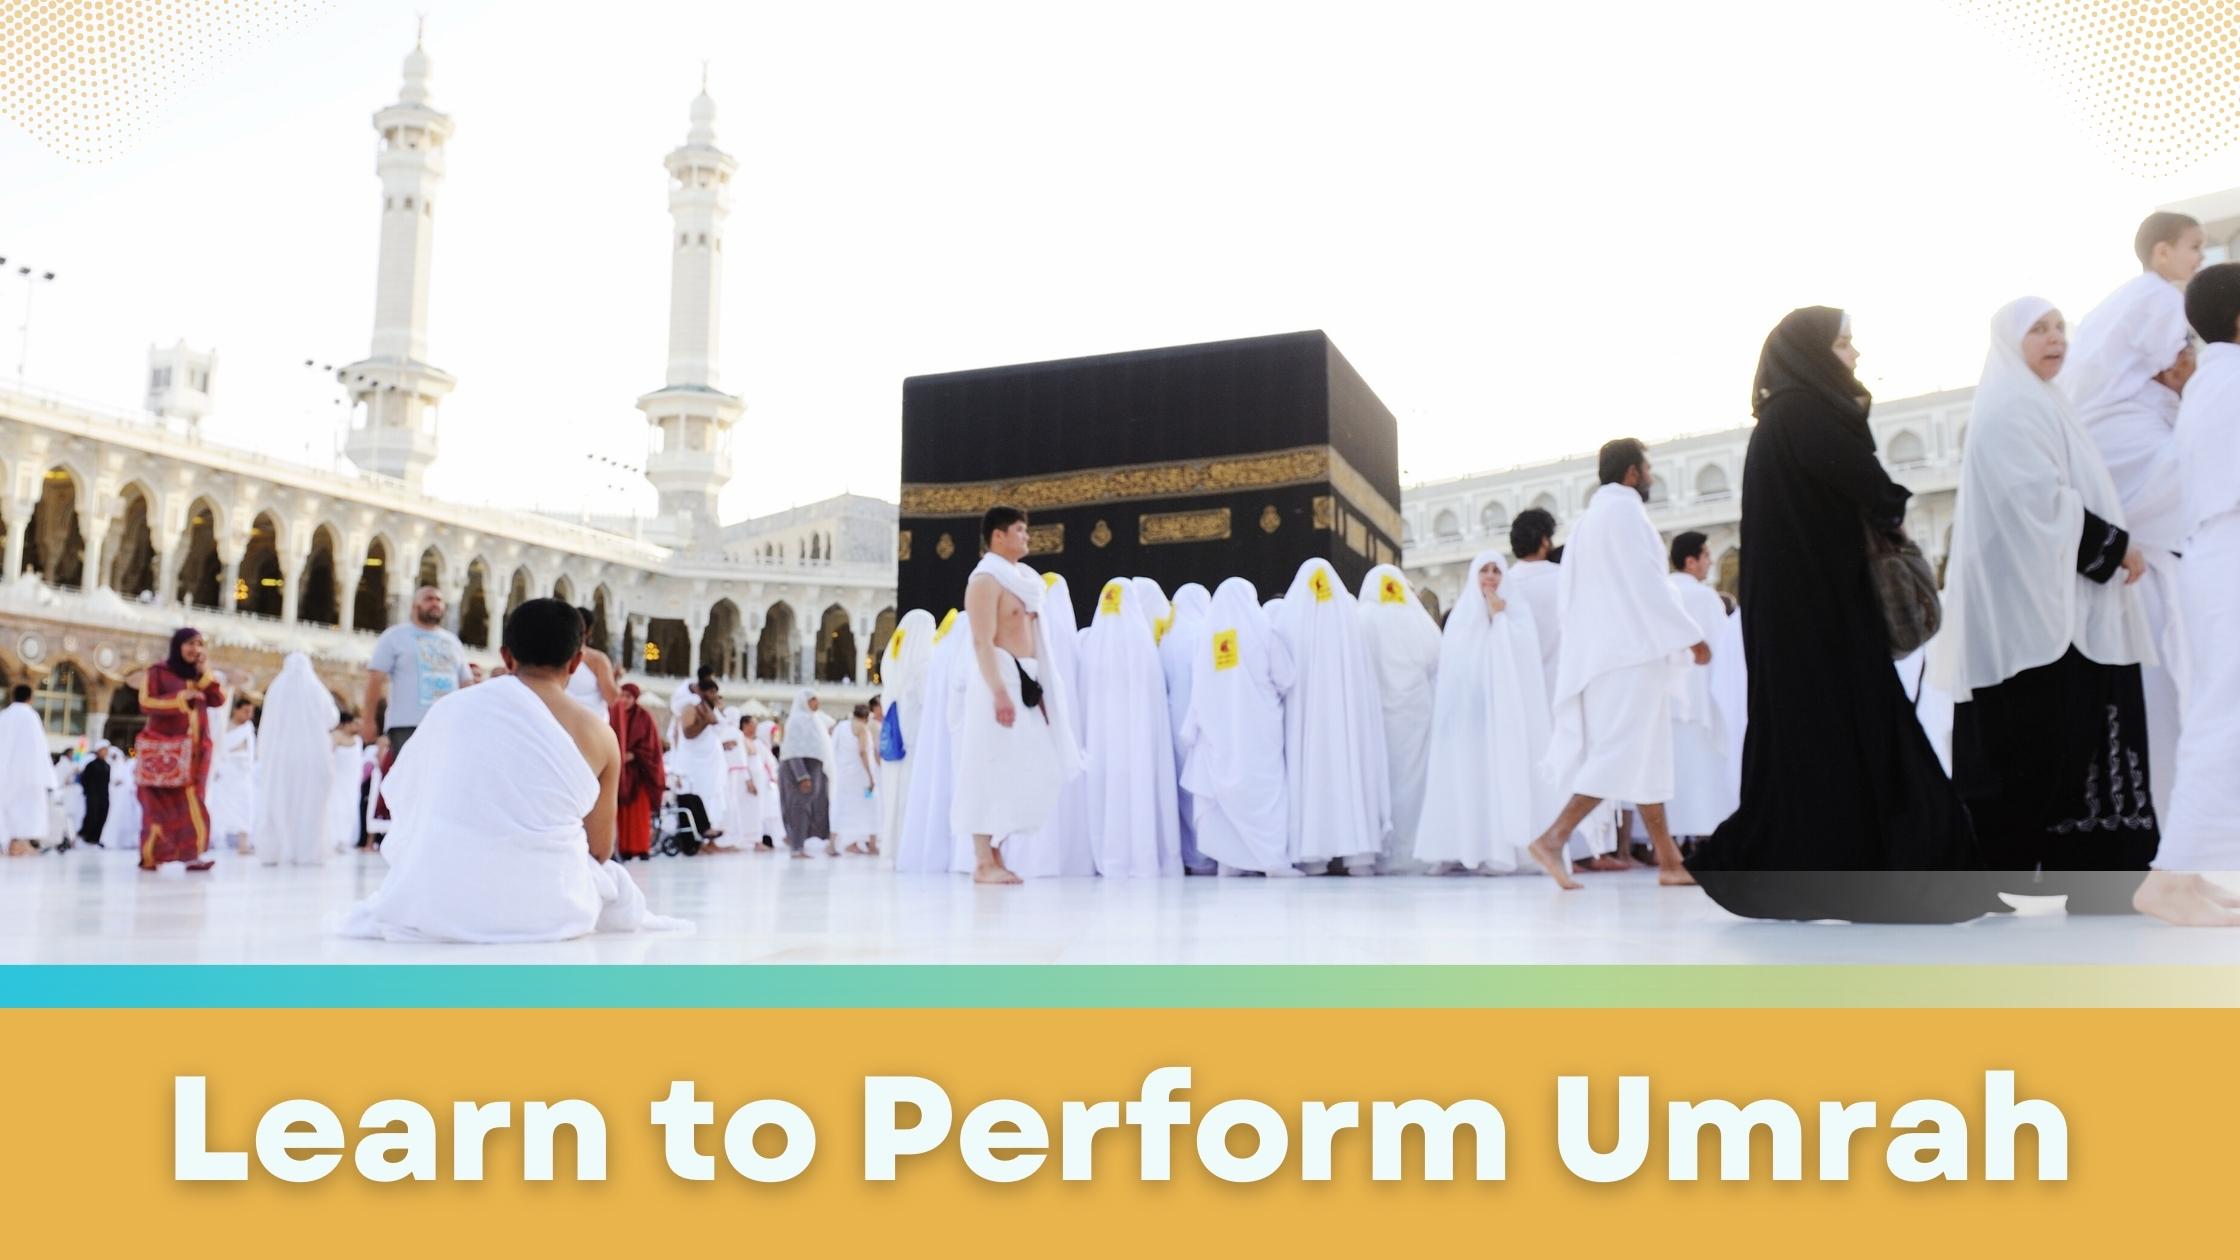 How to perform umrah in islam and all information about performing umrah properly by following Islam is given in a form of comprehensive guide